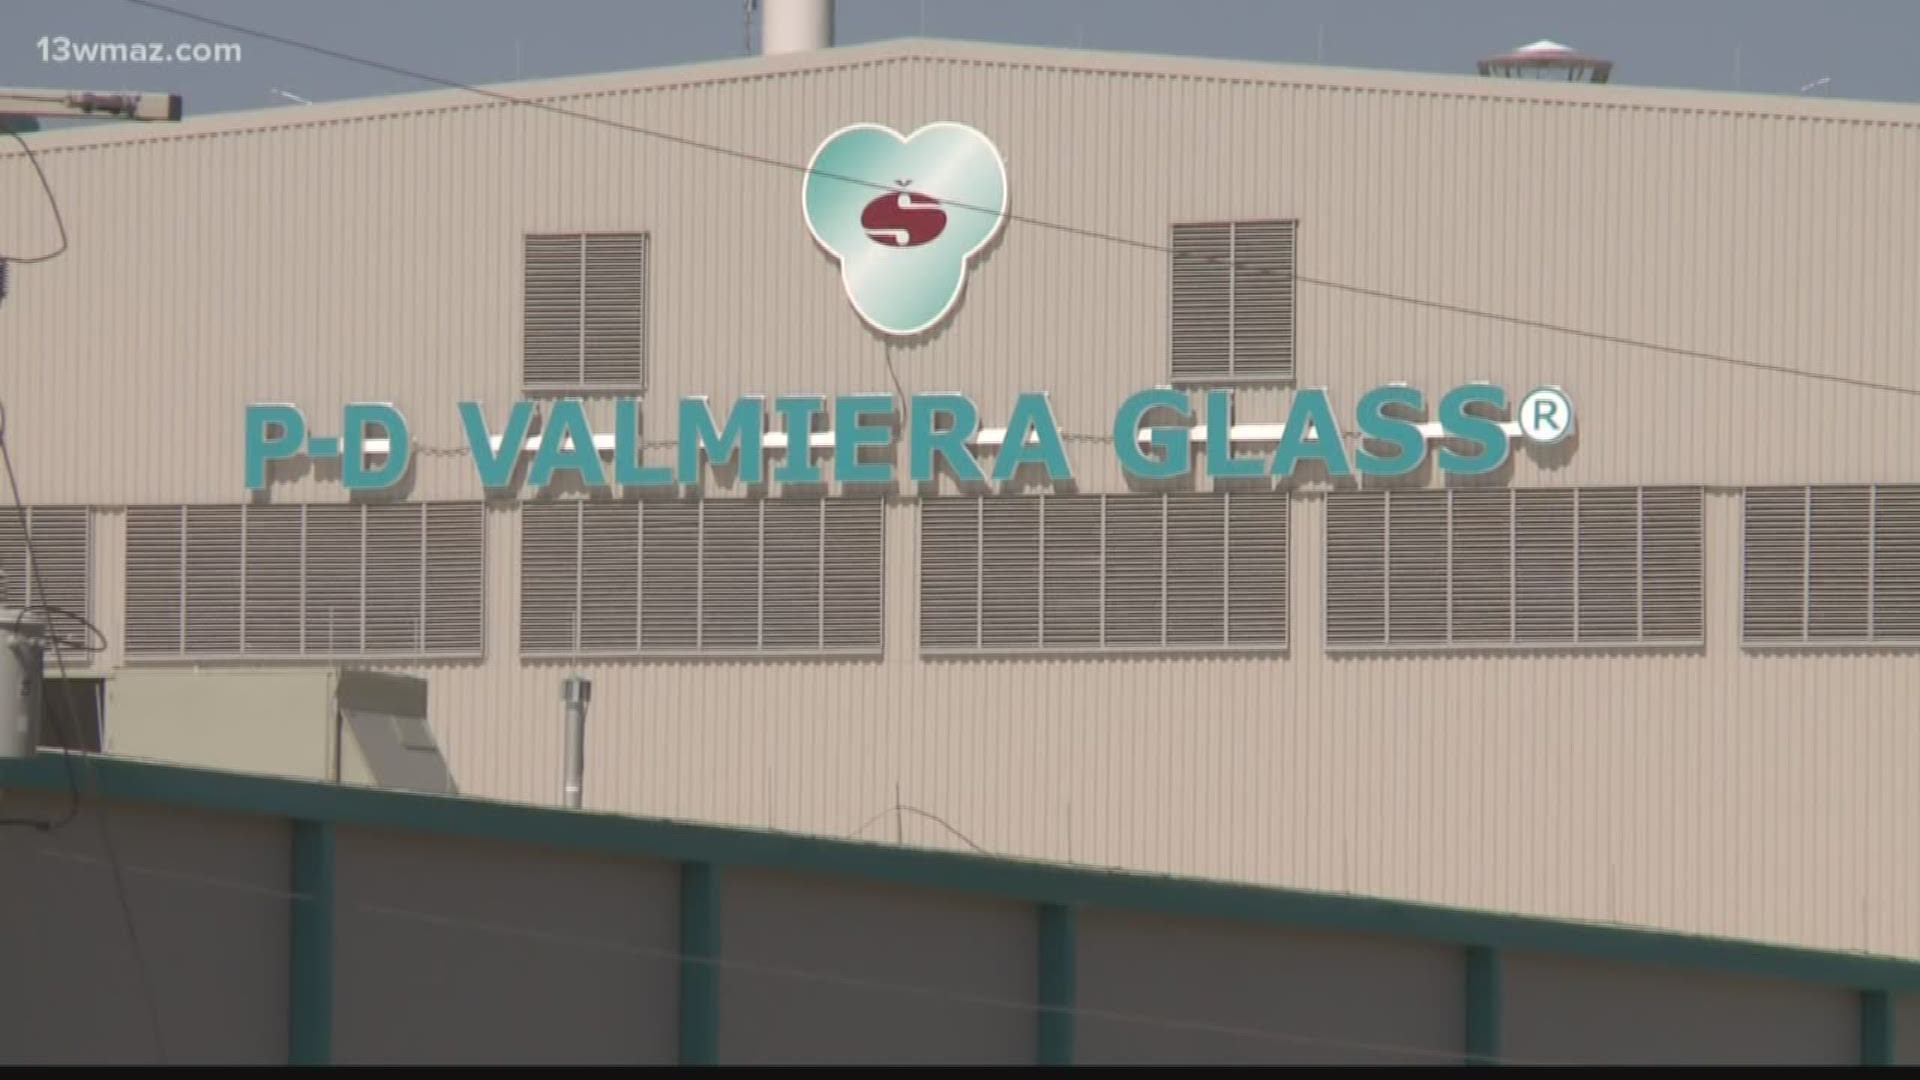 Workers at the Valmiera Glass plant in Dublin were notified Monday that the plant would be unexpectedly closing immediately.